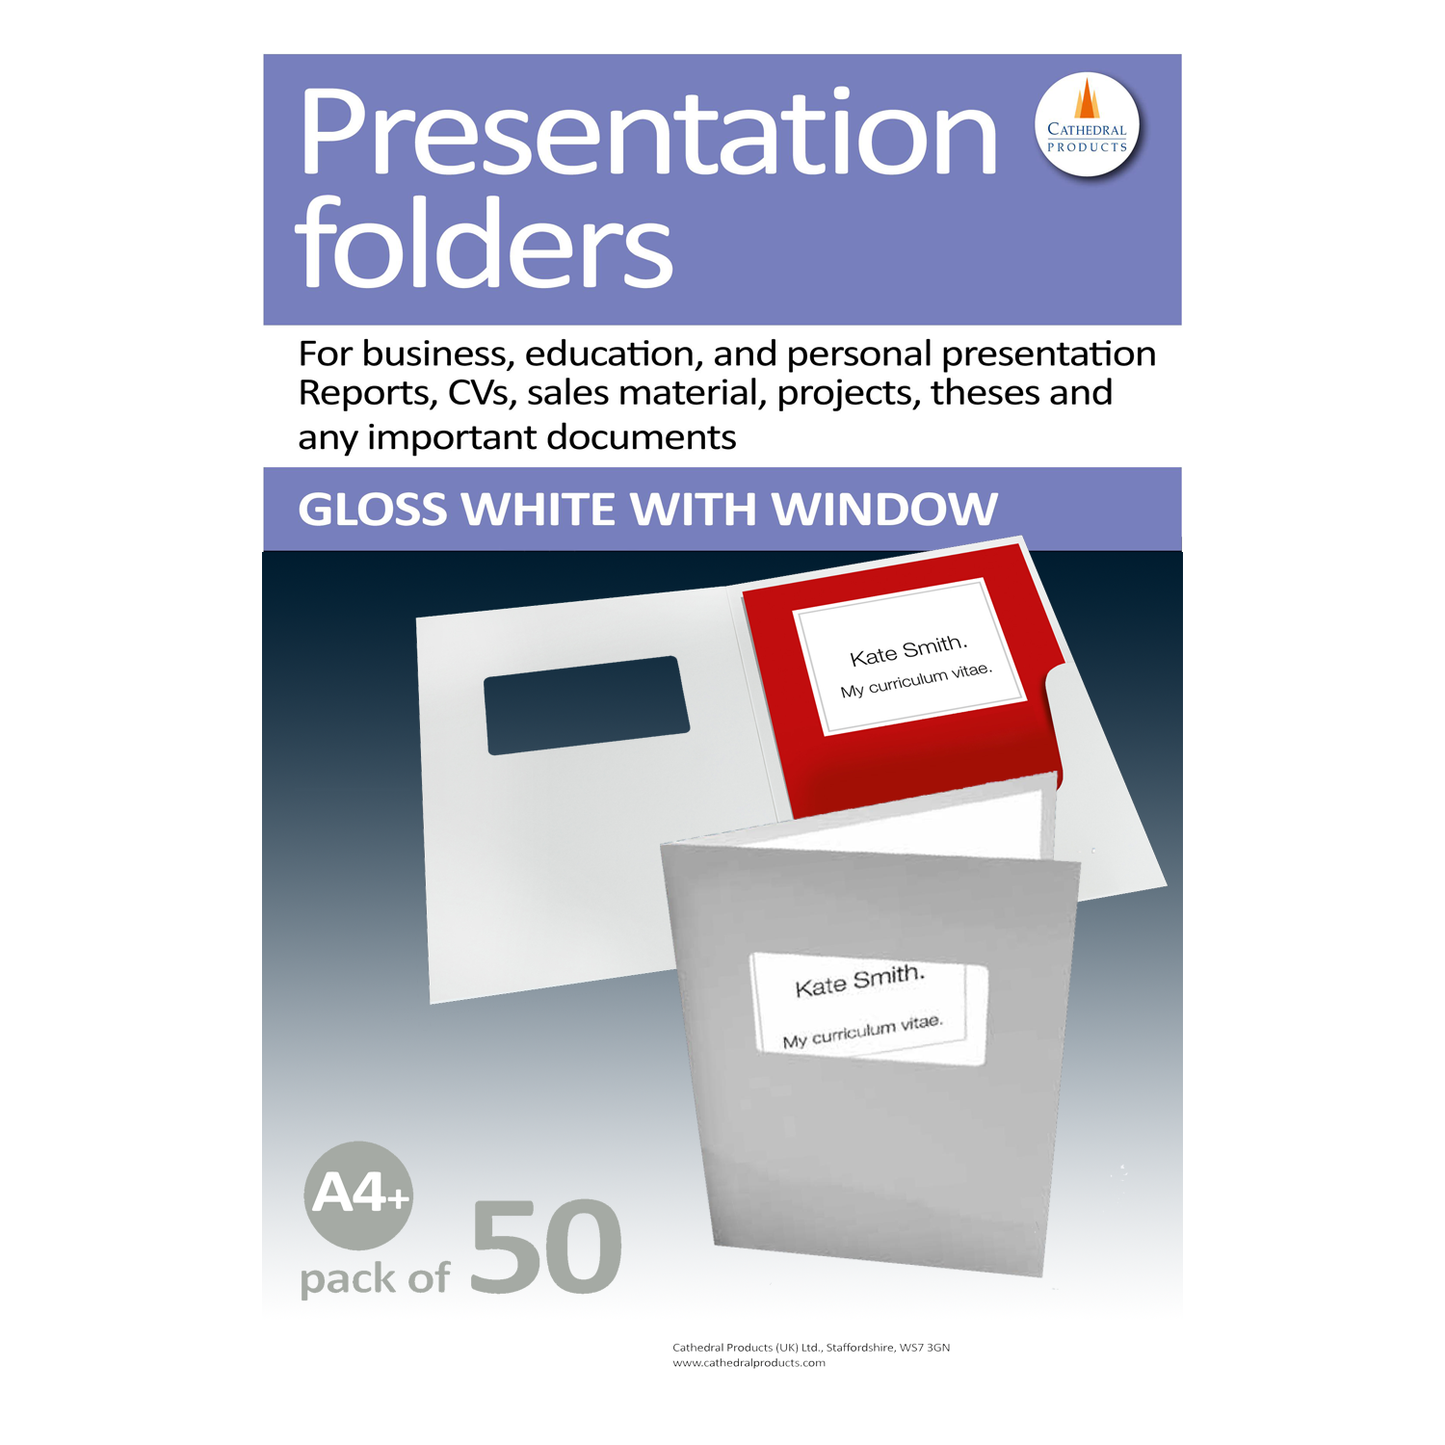 Printing on the box of a pack of 50 Cathedral Products A4 sized Presentation Folders, with window, showcasing the multi-purpose gloss white folders with a business card holder and front window. The text emphasizes their use for business, education, and personal presentation needs.